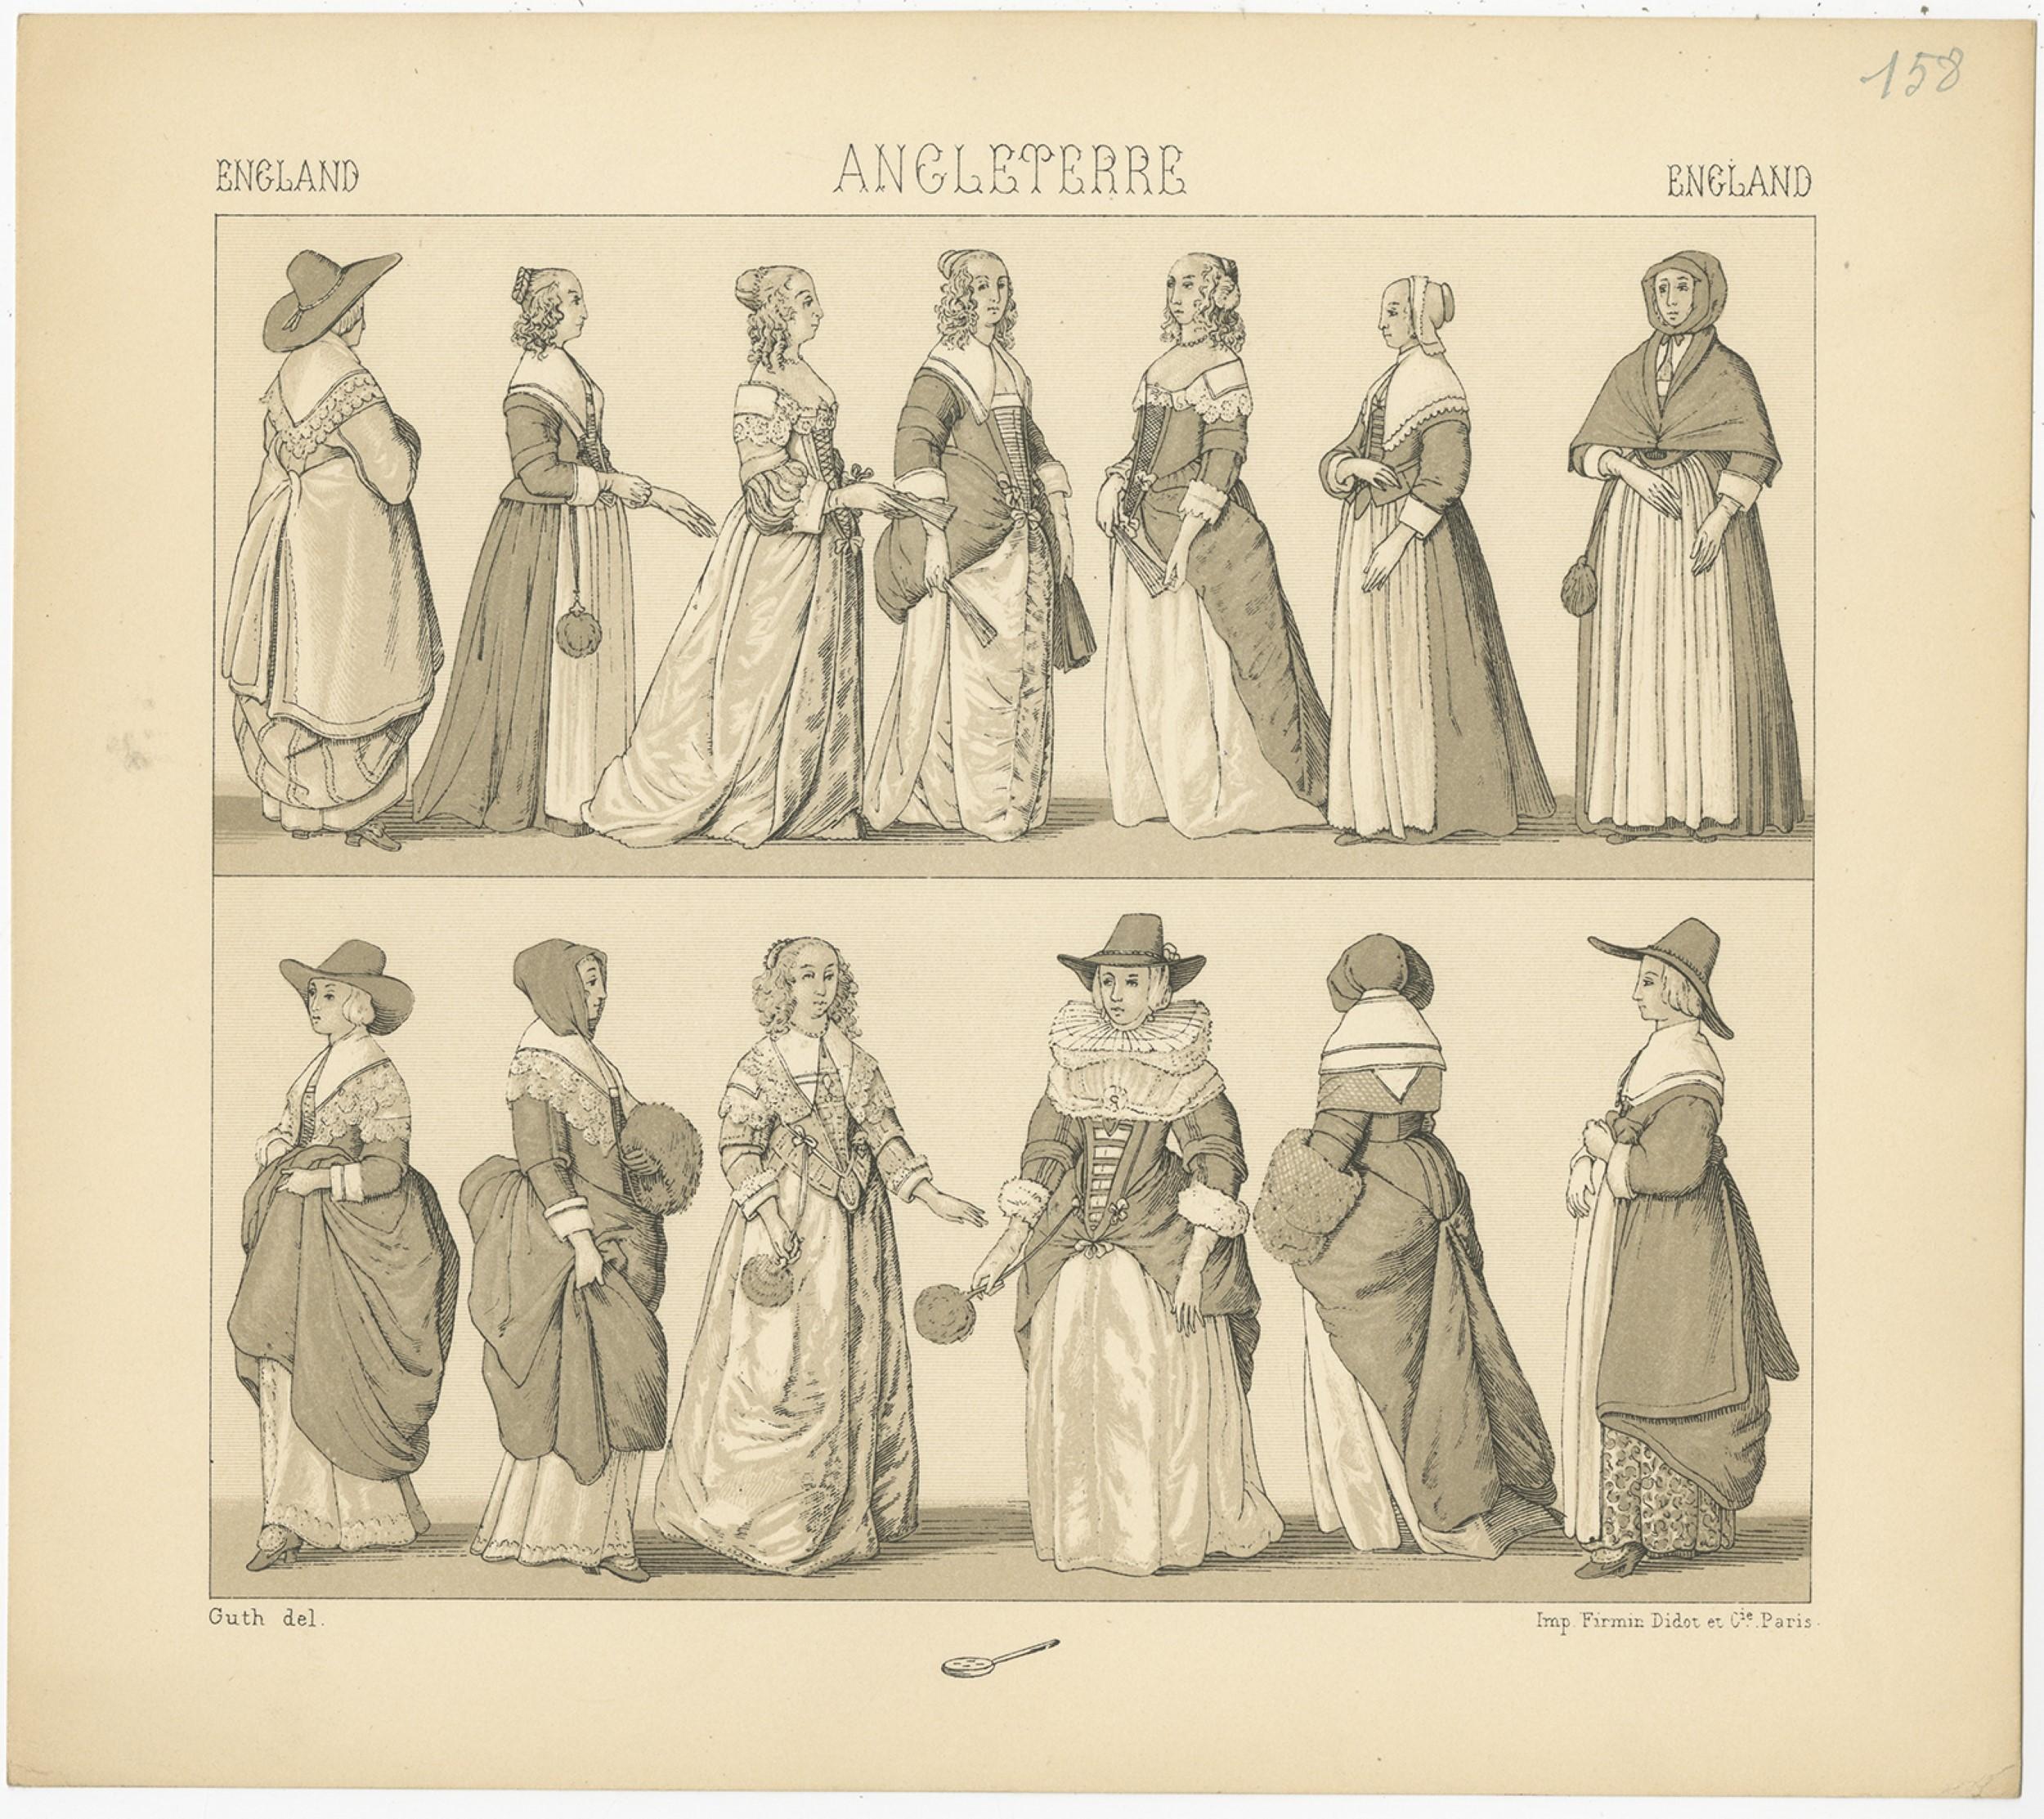 Antique print titled 'England - Angleterre - England'. Chromolithograph of English Dresses. This print originates from 'Le Costume Historique' by M.A. Racinet. Published, circa 1880.

  